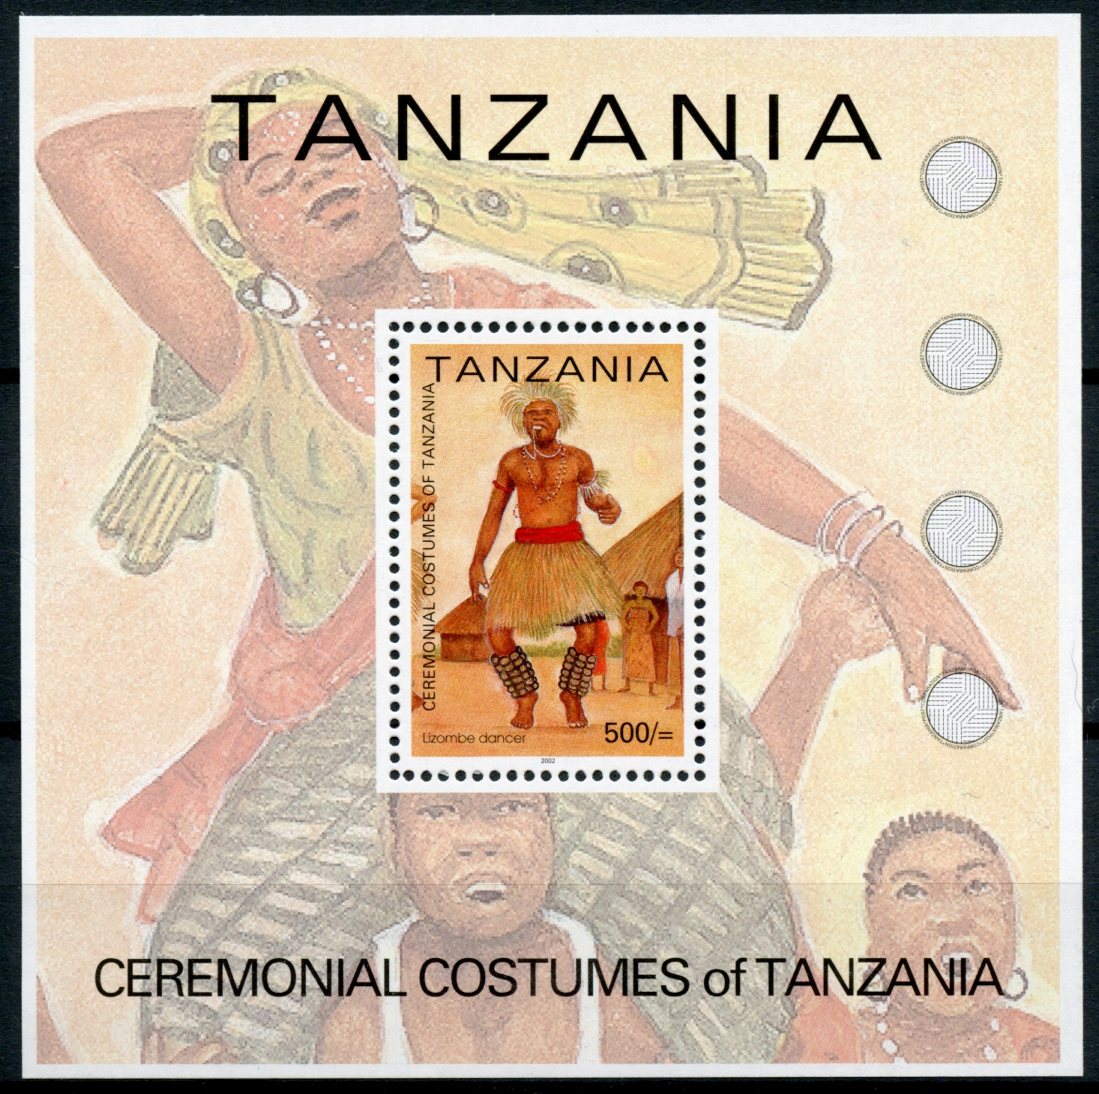 Tanzania Cultures Stamps 2002 MNH Ceremonial Costumes Lizombe Dancer 1v S/S